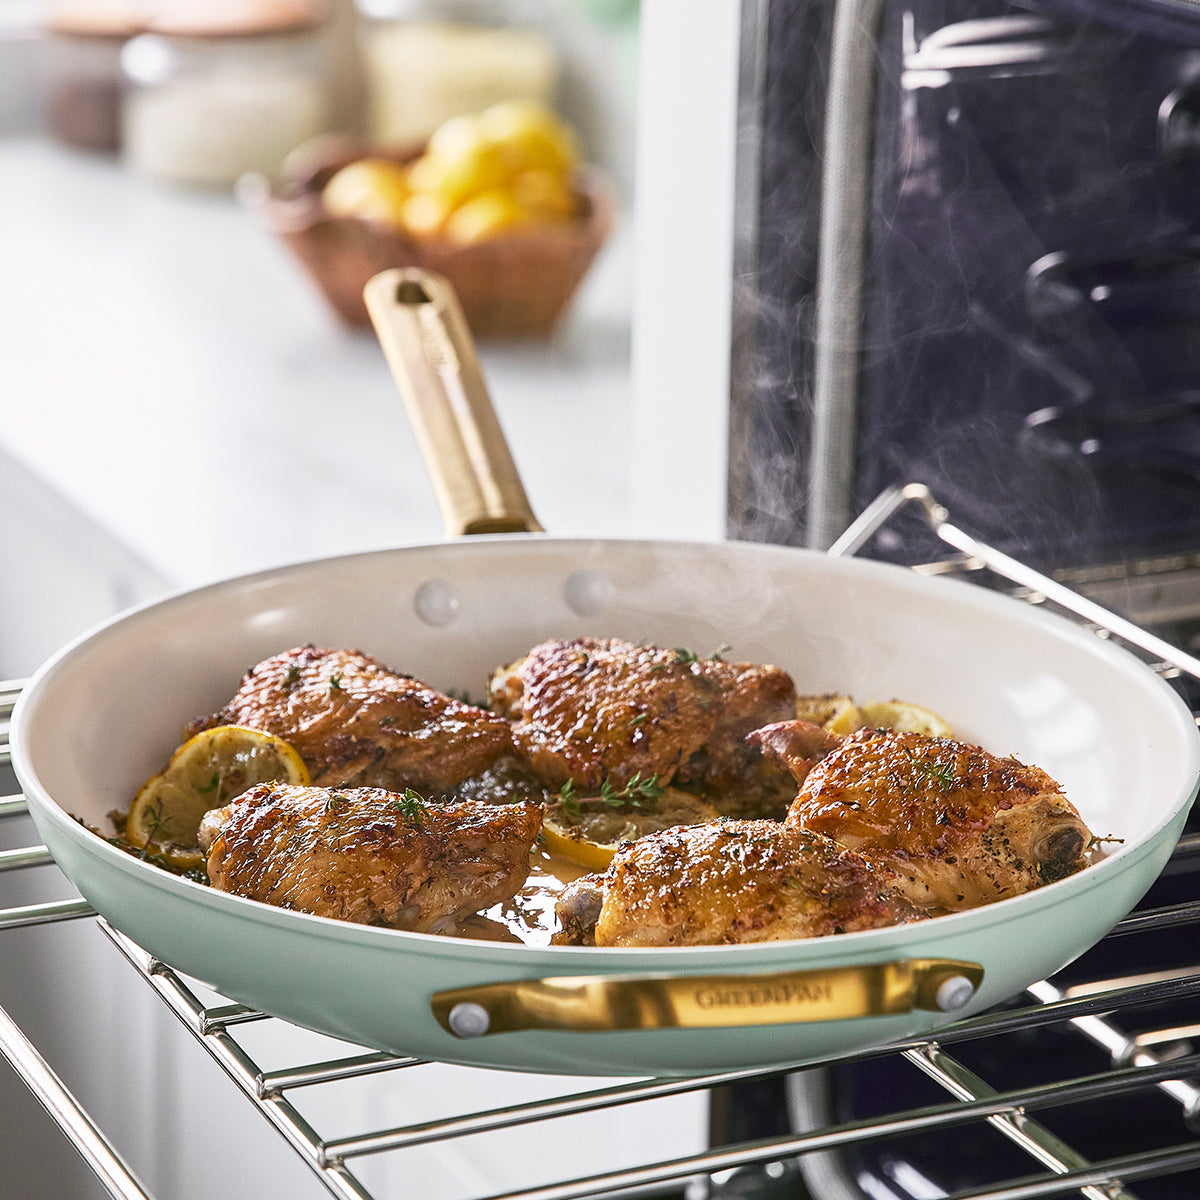 GreenPan vs. All-Clad (Which Non-Stick Cookware Is Better